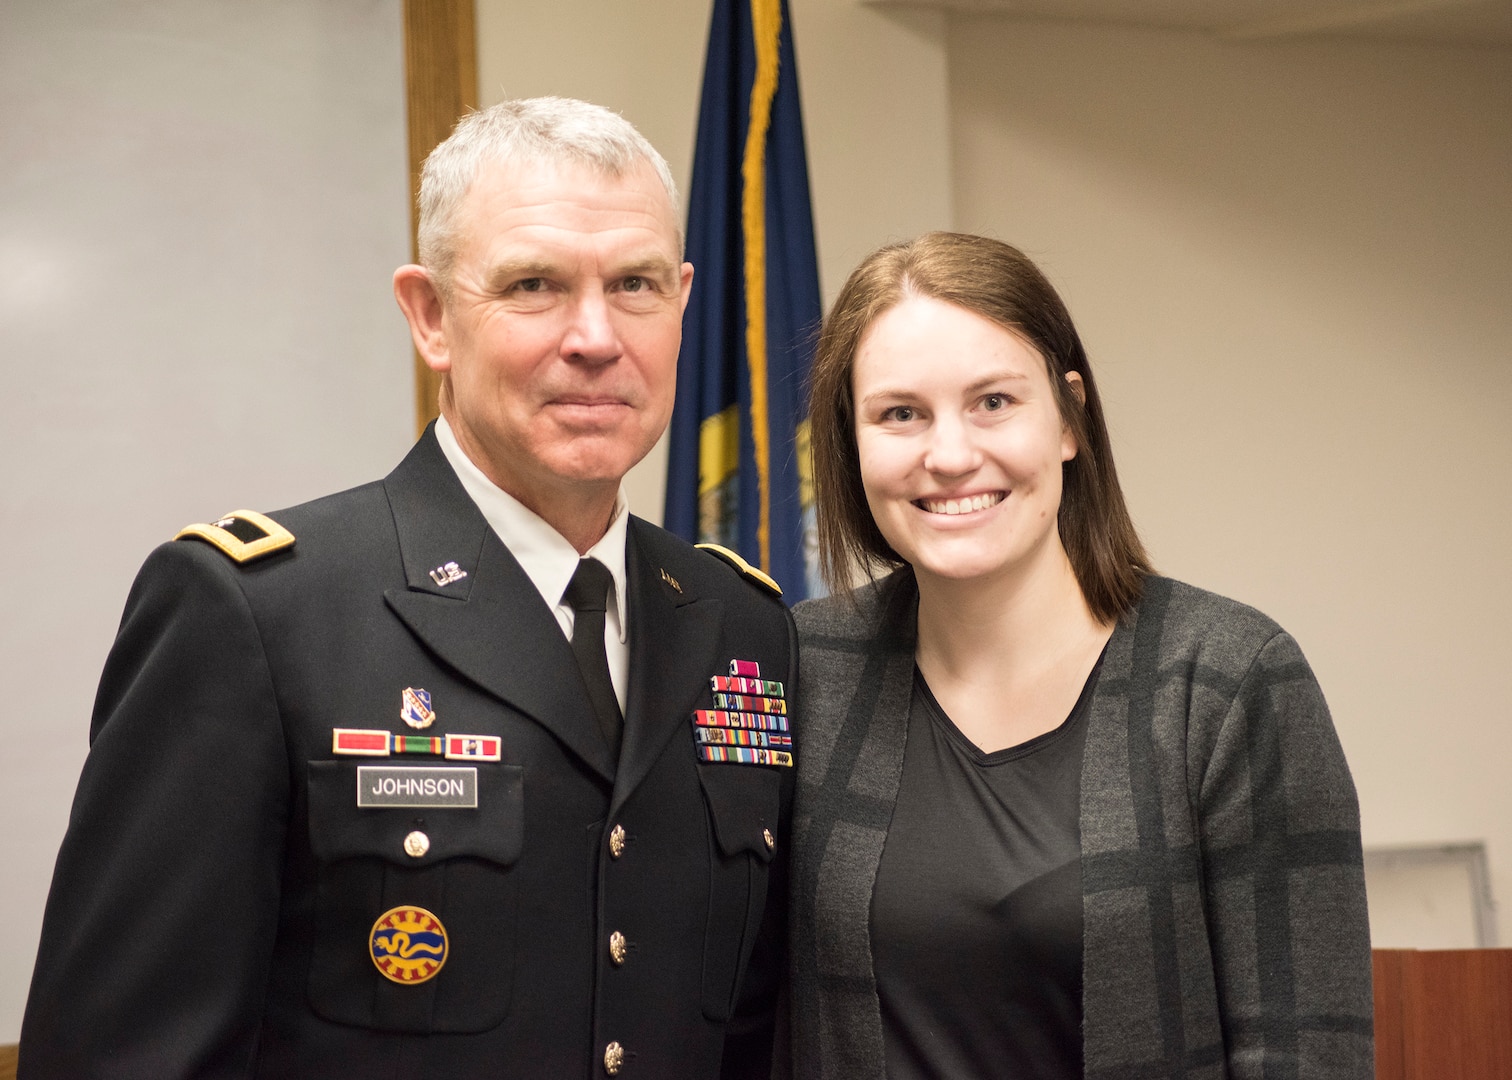 Idaho Army National Guard Brig. Gen. Russell Johnson and his daughter, 2nd Lt. Marah Sharpe, on Gowen Field in Boise, Idaho, Jan. 28, 2022, after Johnson administered the oath of commissioning to Sharpe. Russell is retiring from the Guard in March after more than 40 years of service just as his daughter begins her career in the same organization.